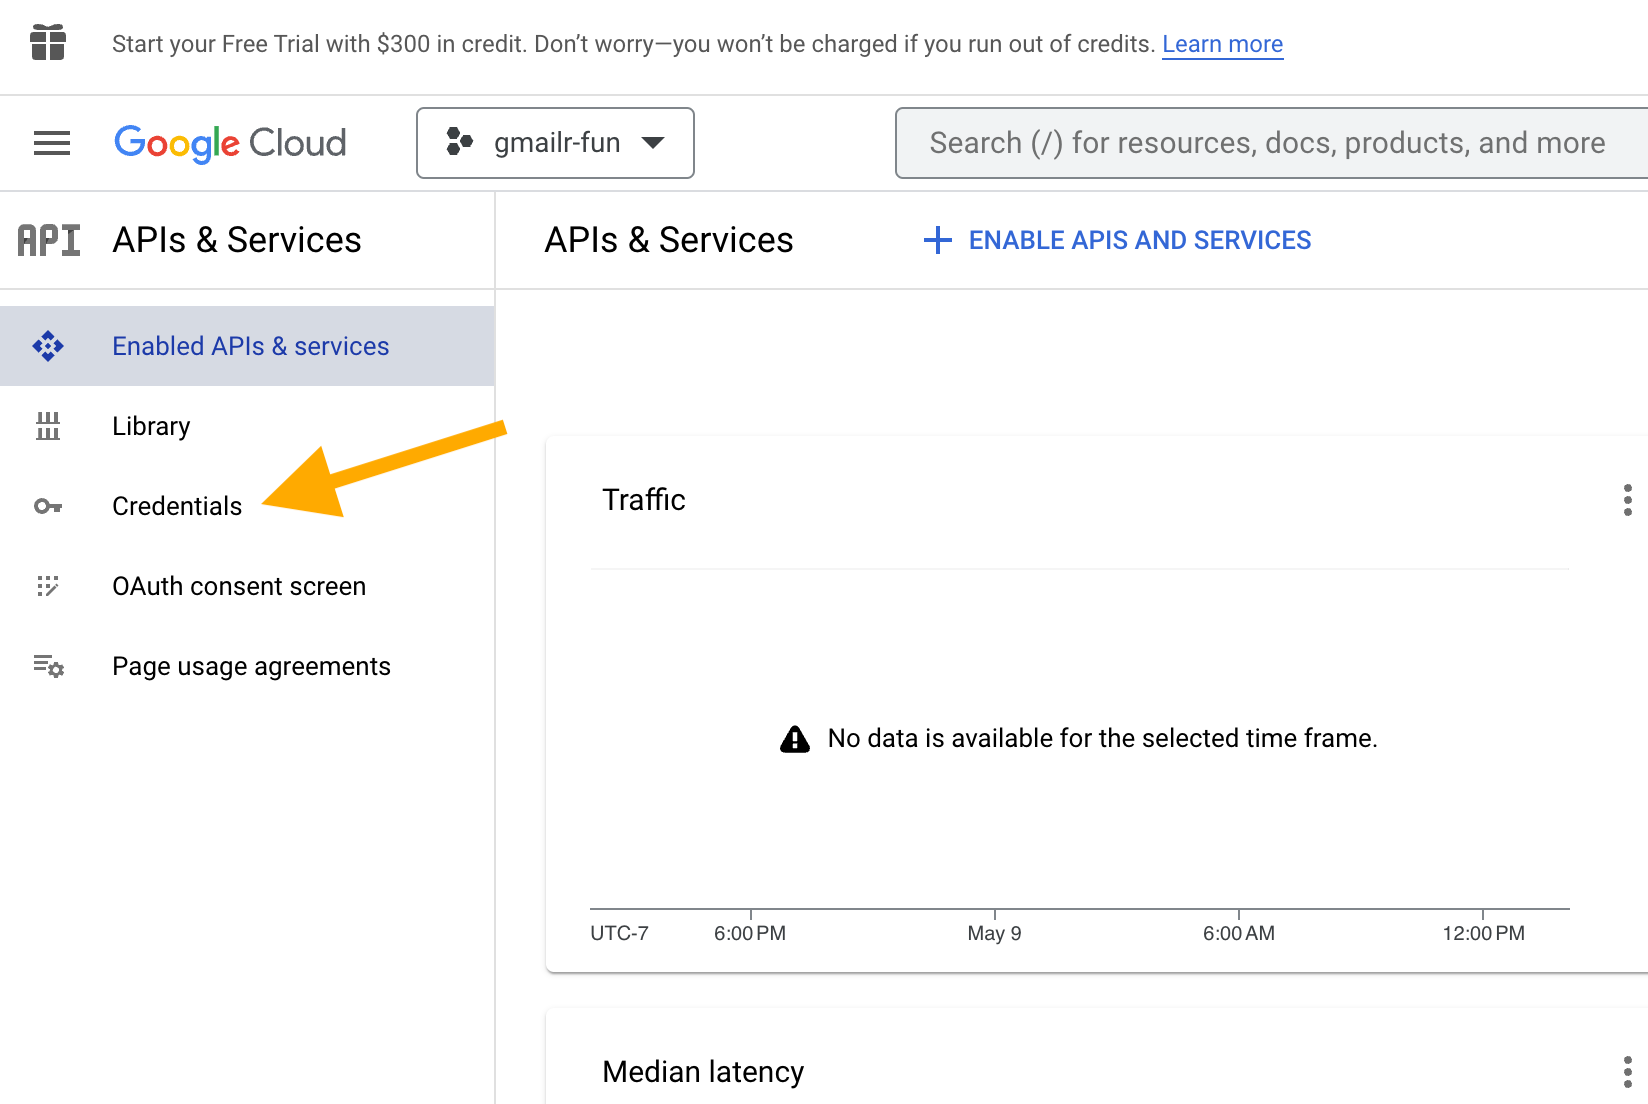 Screenshot with an arrow pointing at "Credentials" below "APIs & Services" in a left sidebar.